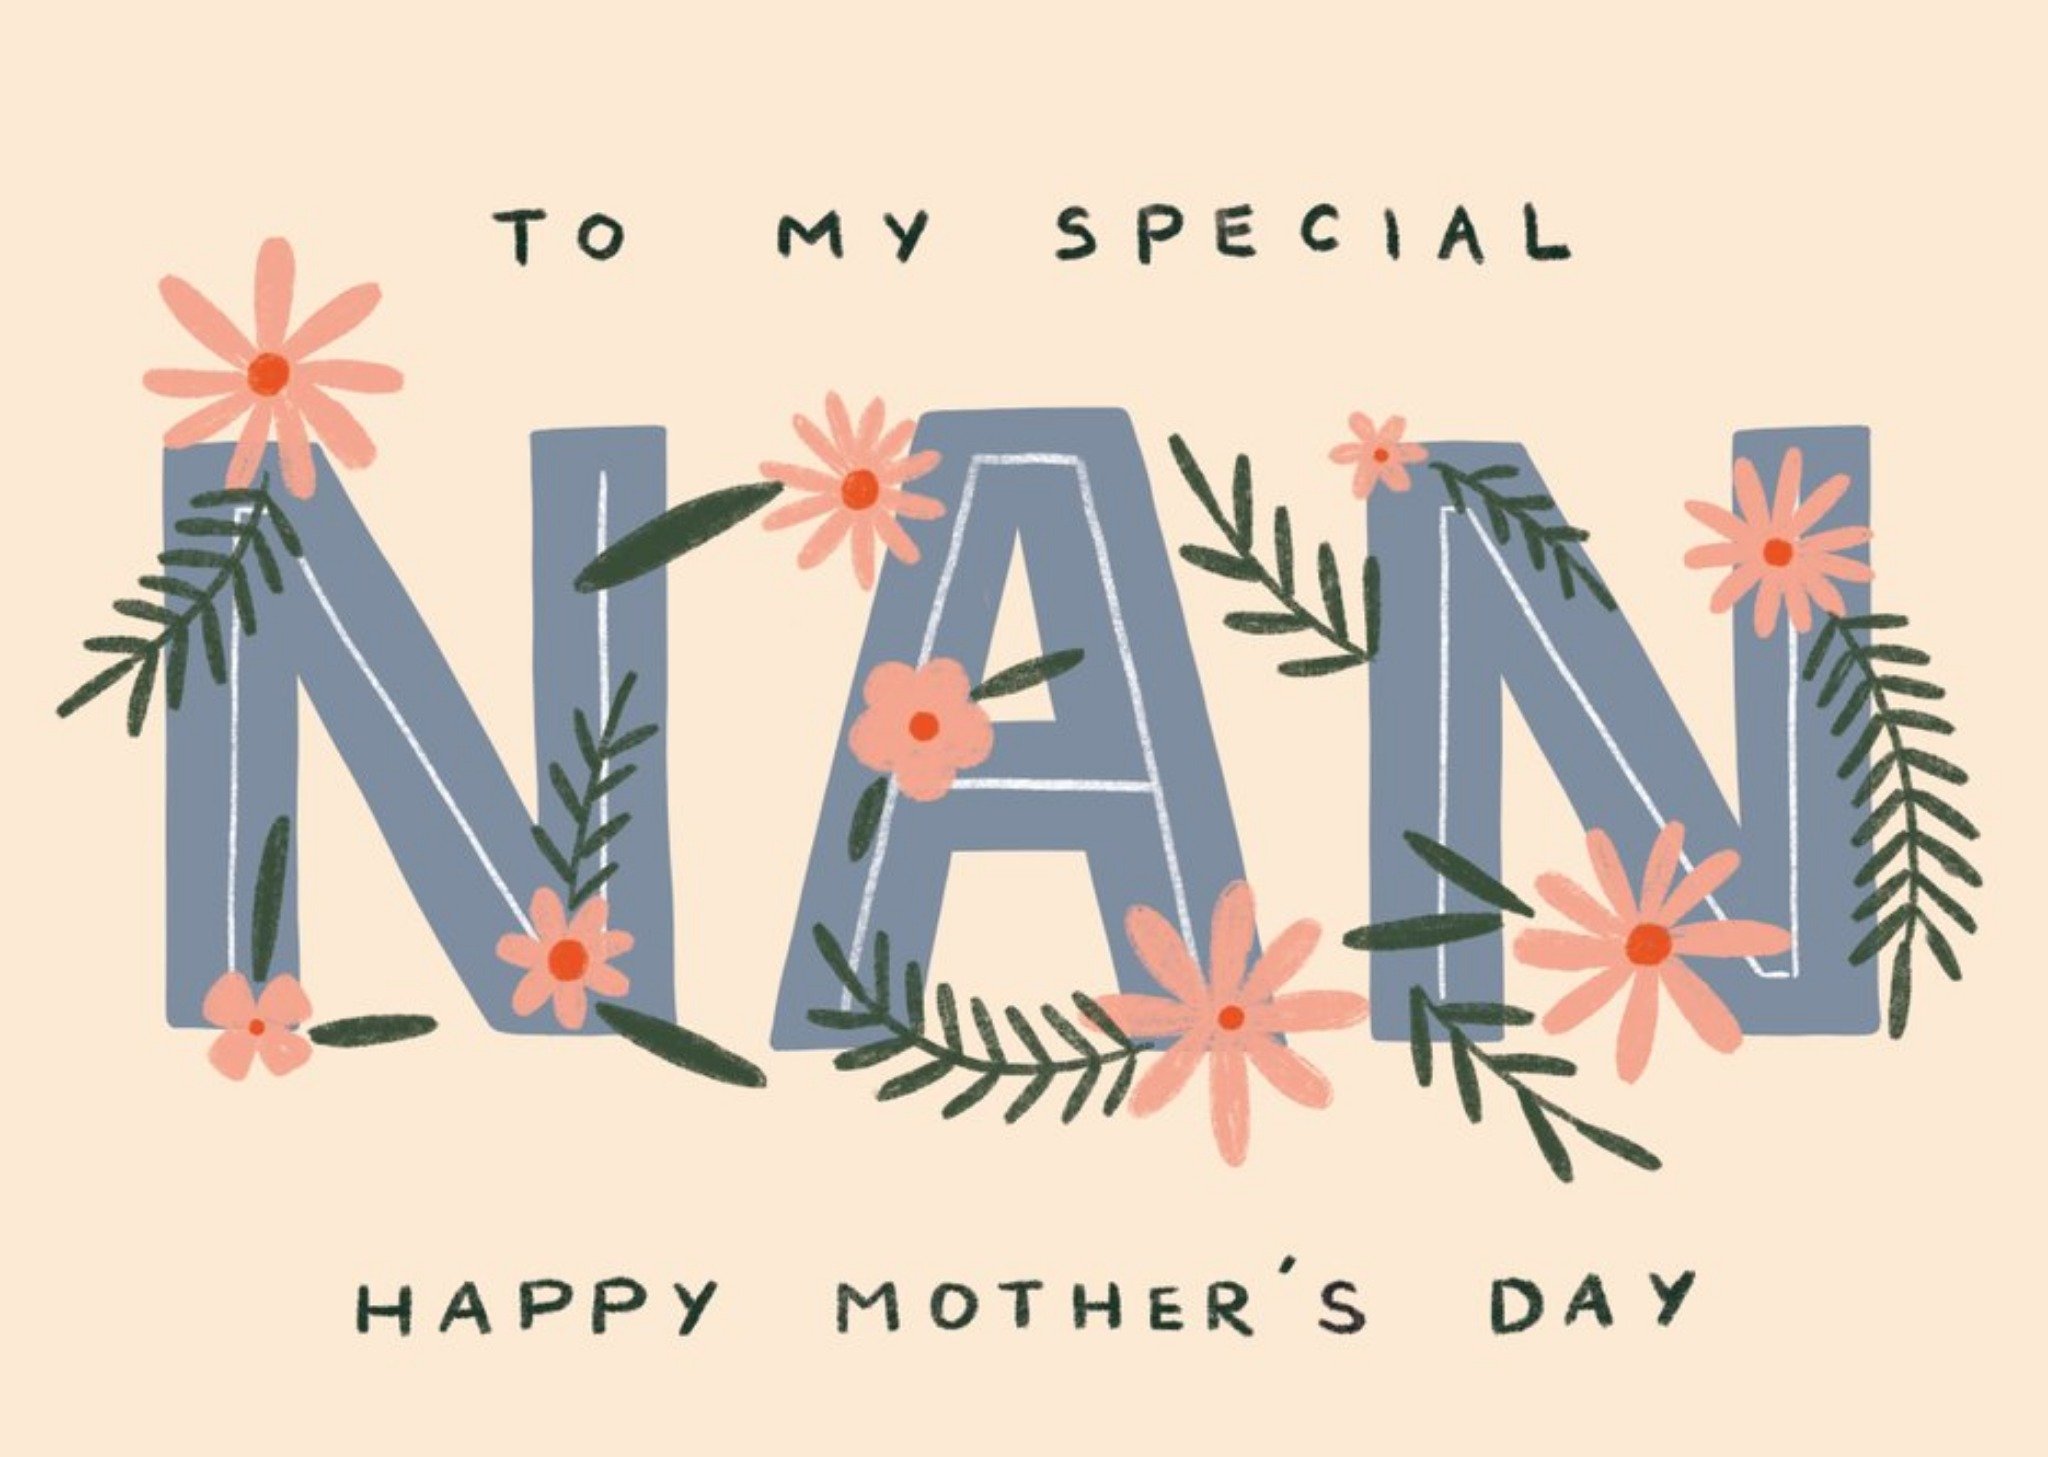 Moonpig To My Special Nan Happy Mother's Day Floral Typographic Card, Large